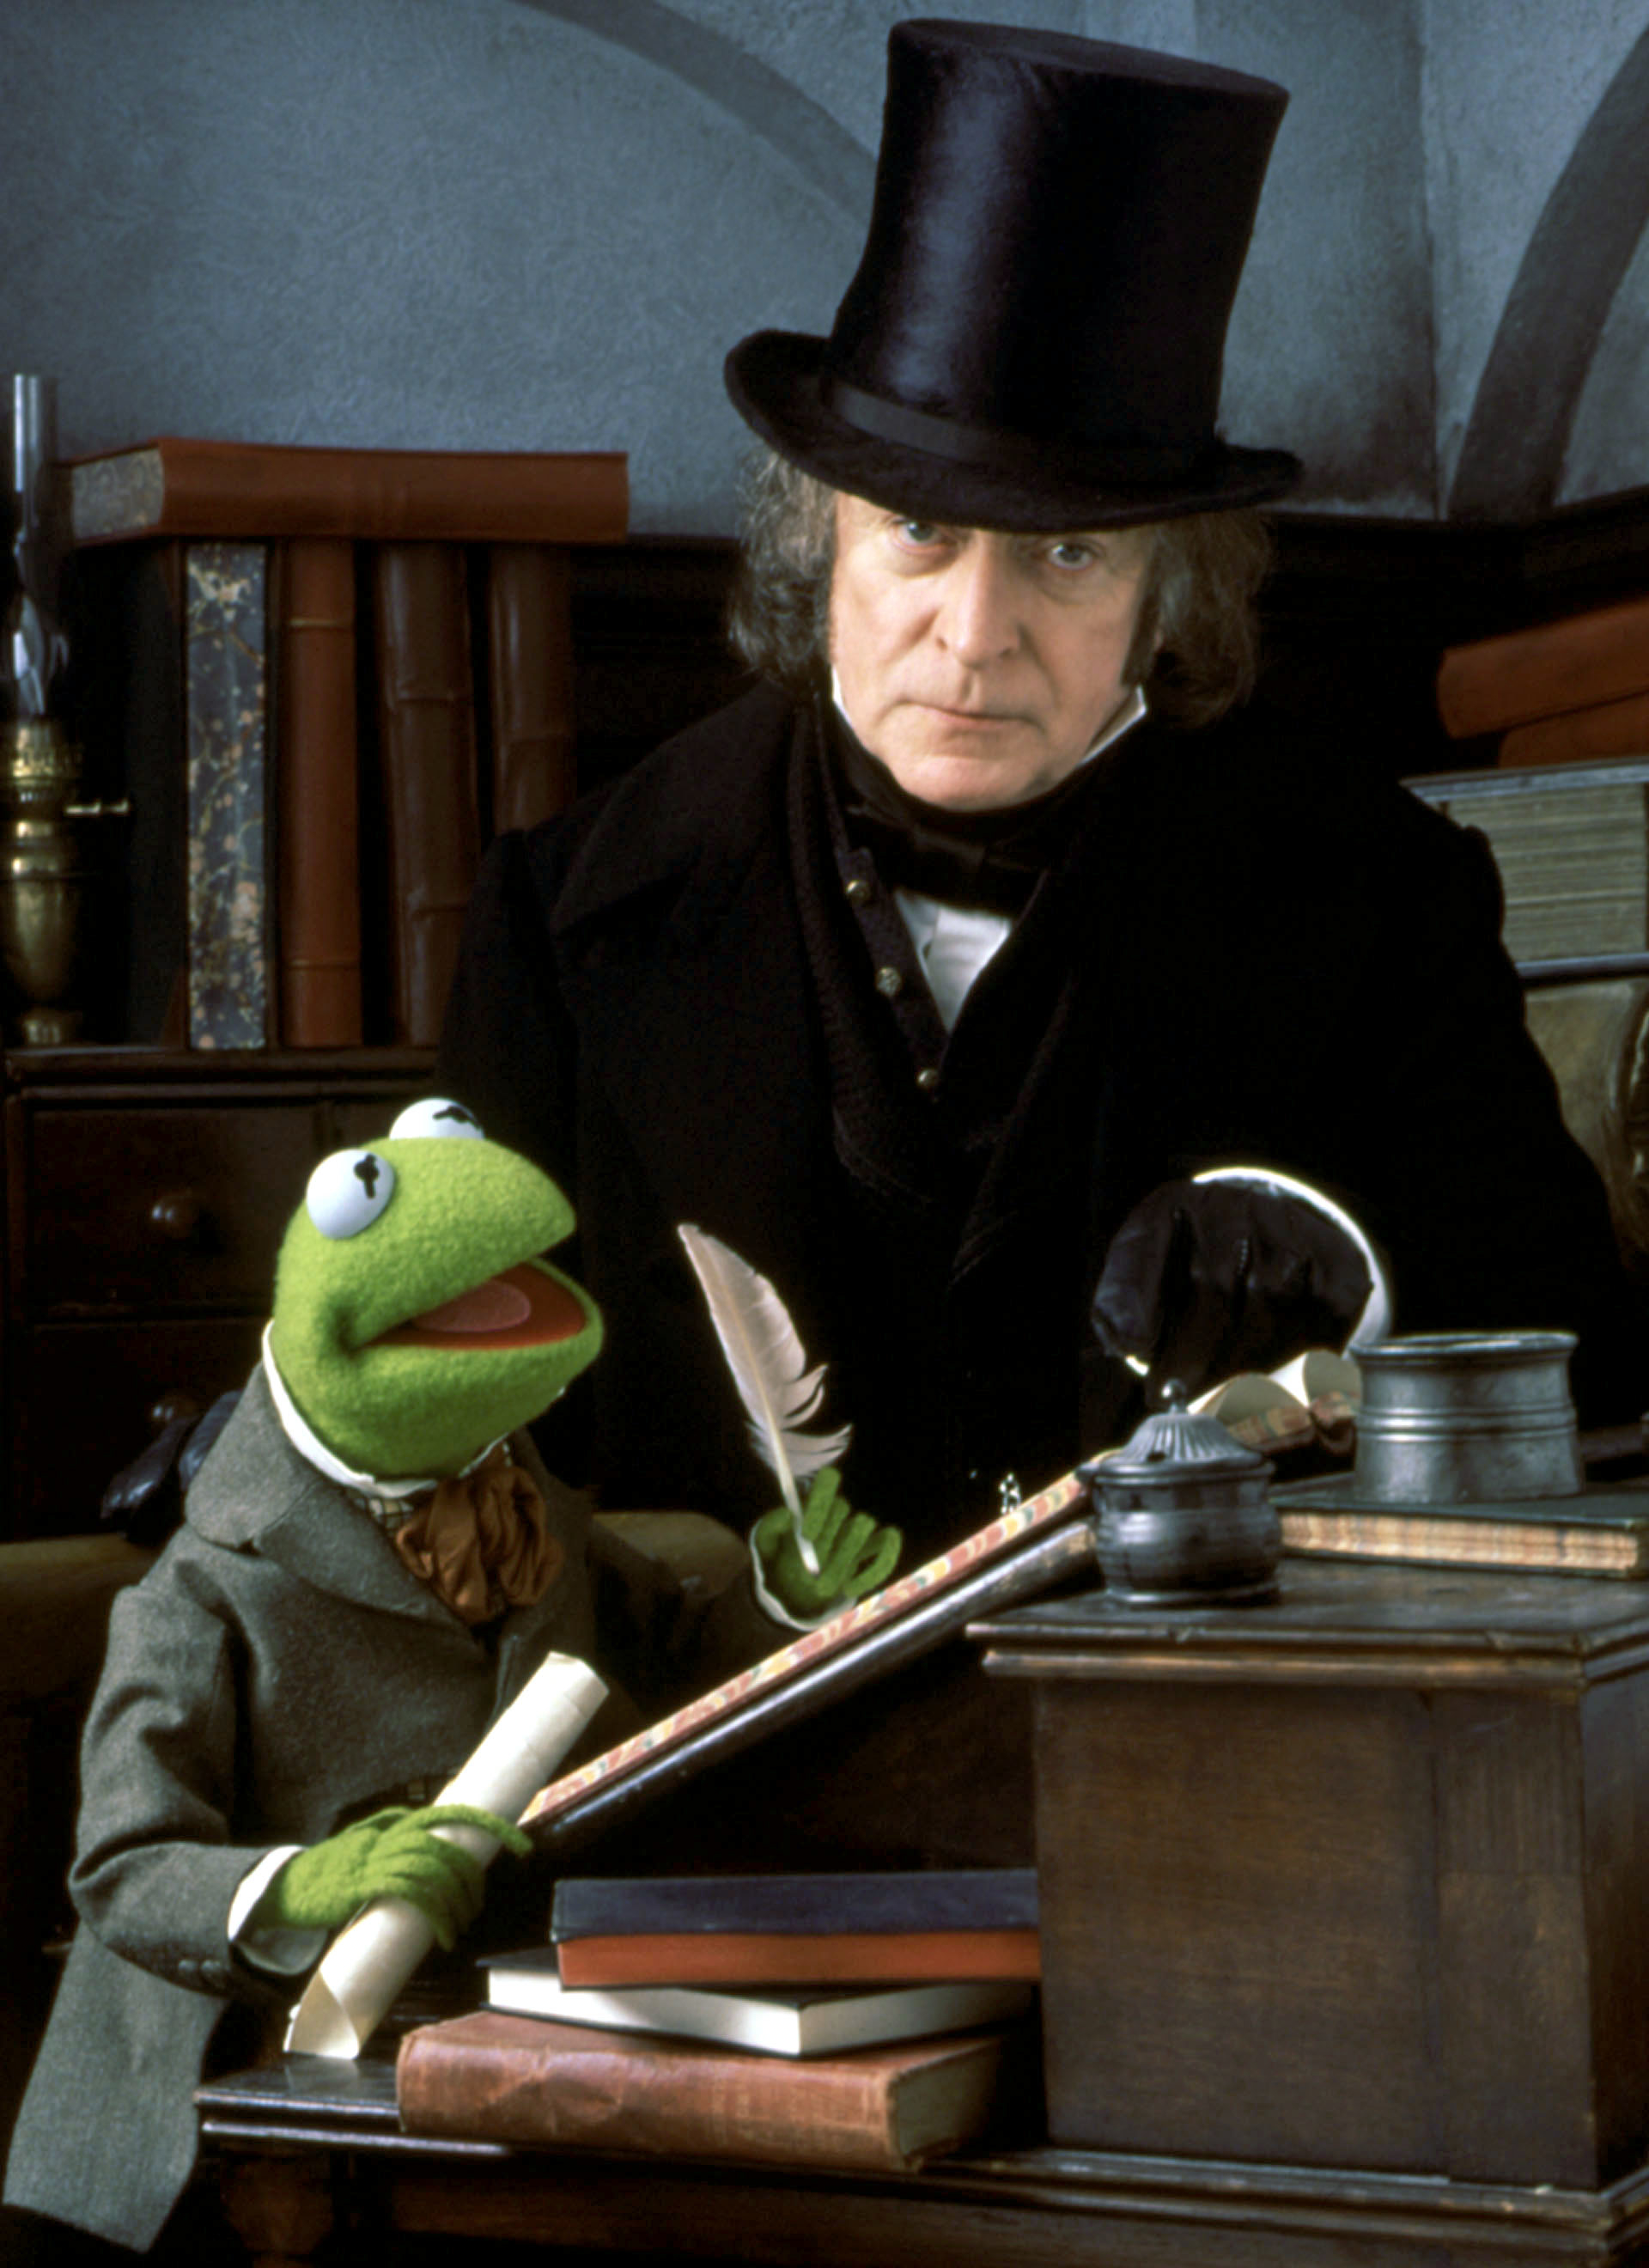 him and kermit at a desk